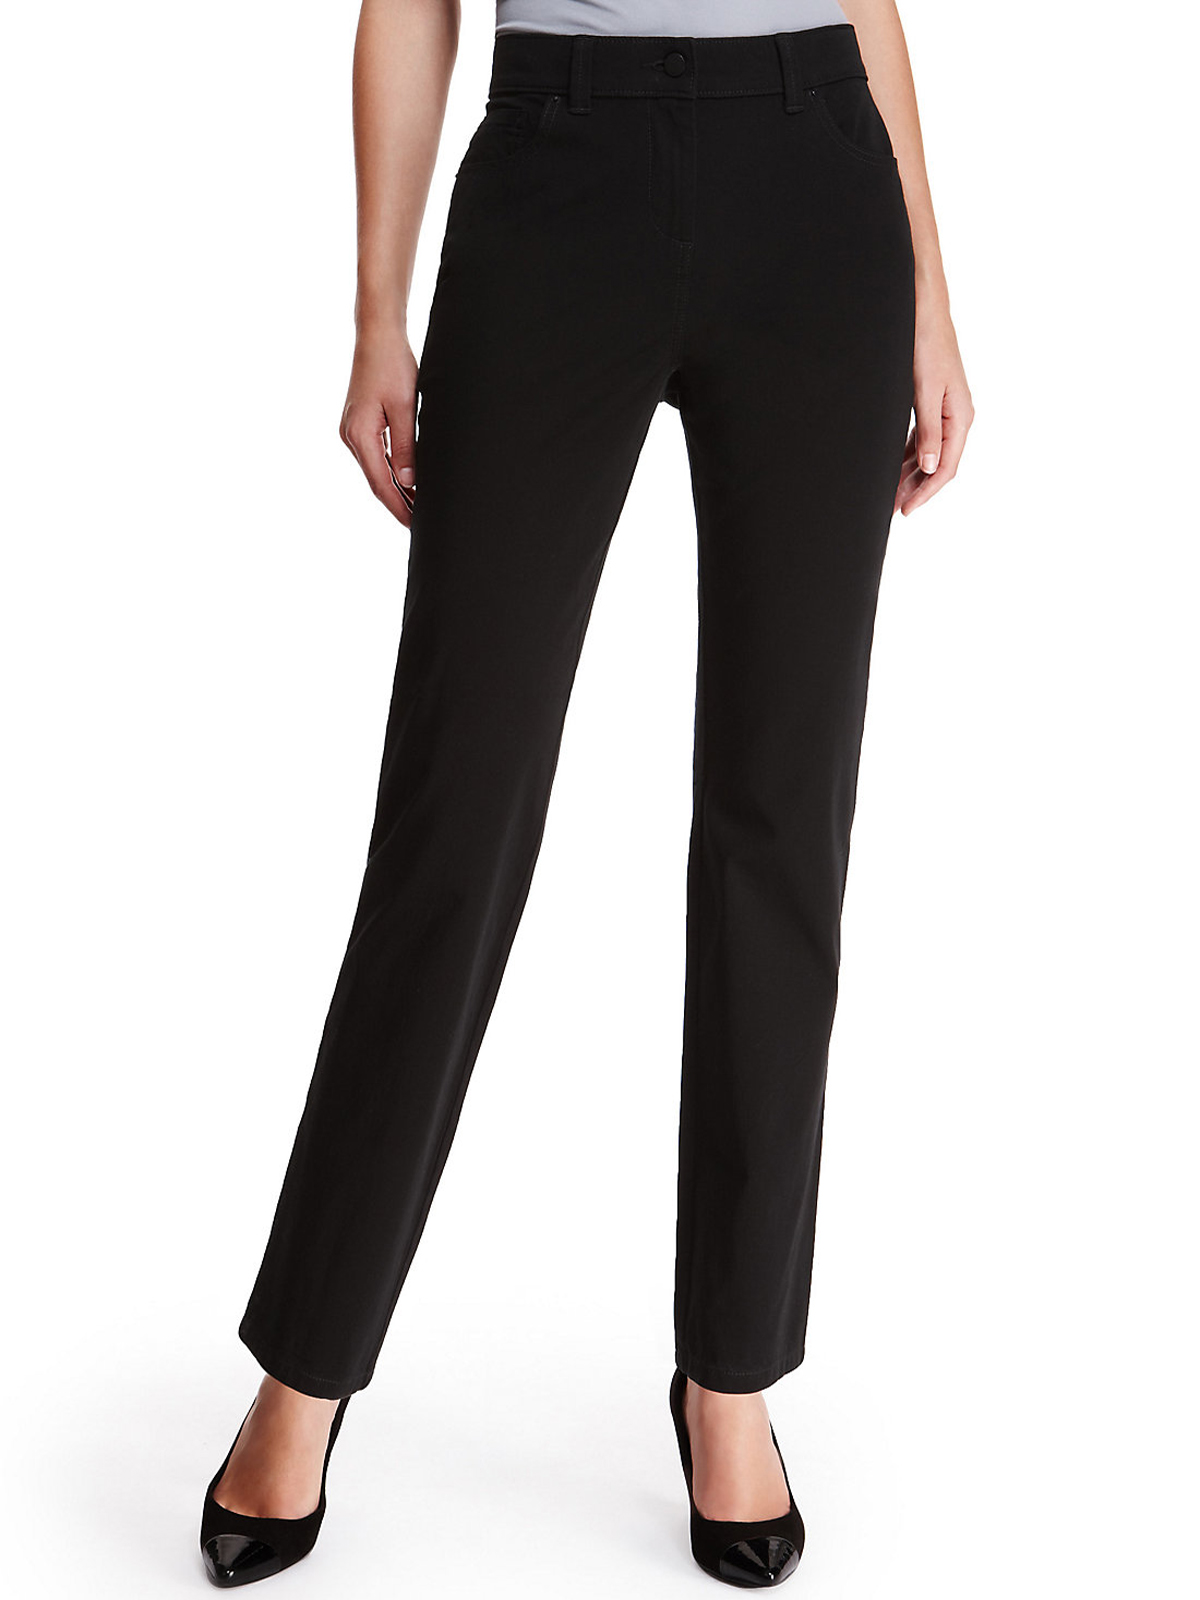 Marks and Spencer - - M&5 BLACK Cotton Rich 2-Way Stretch Straight Leg ...